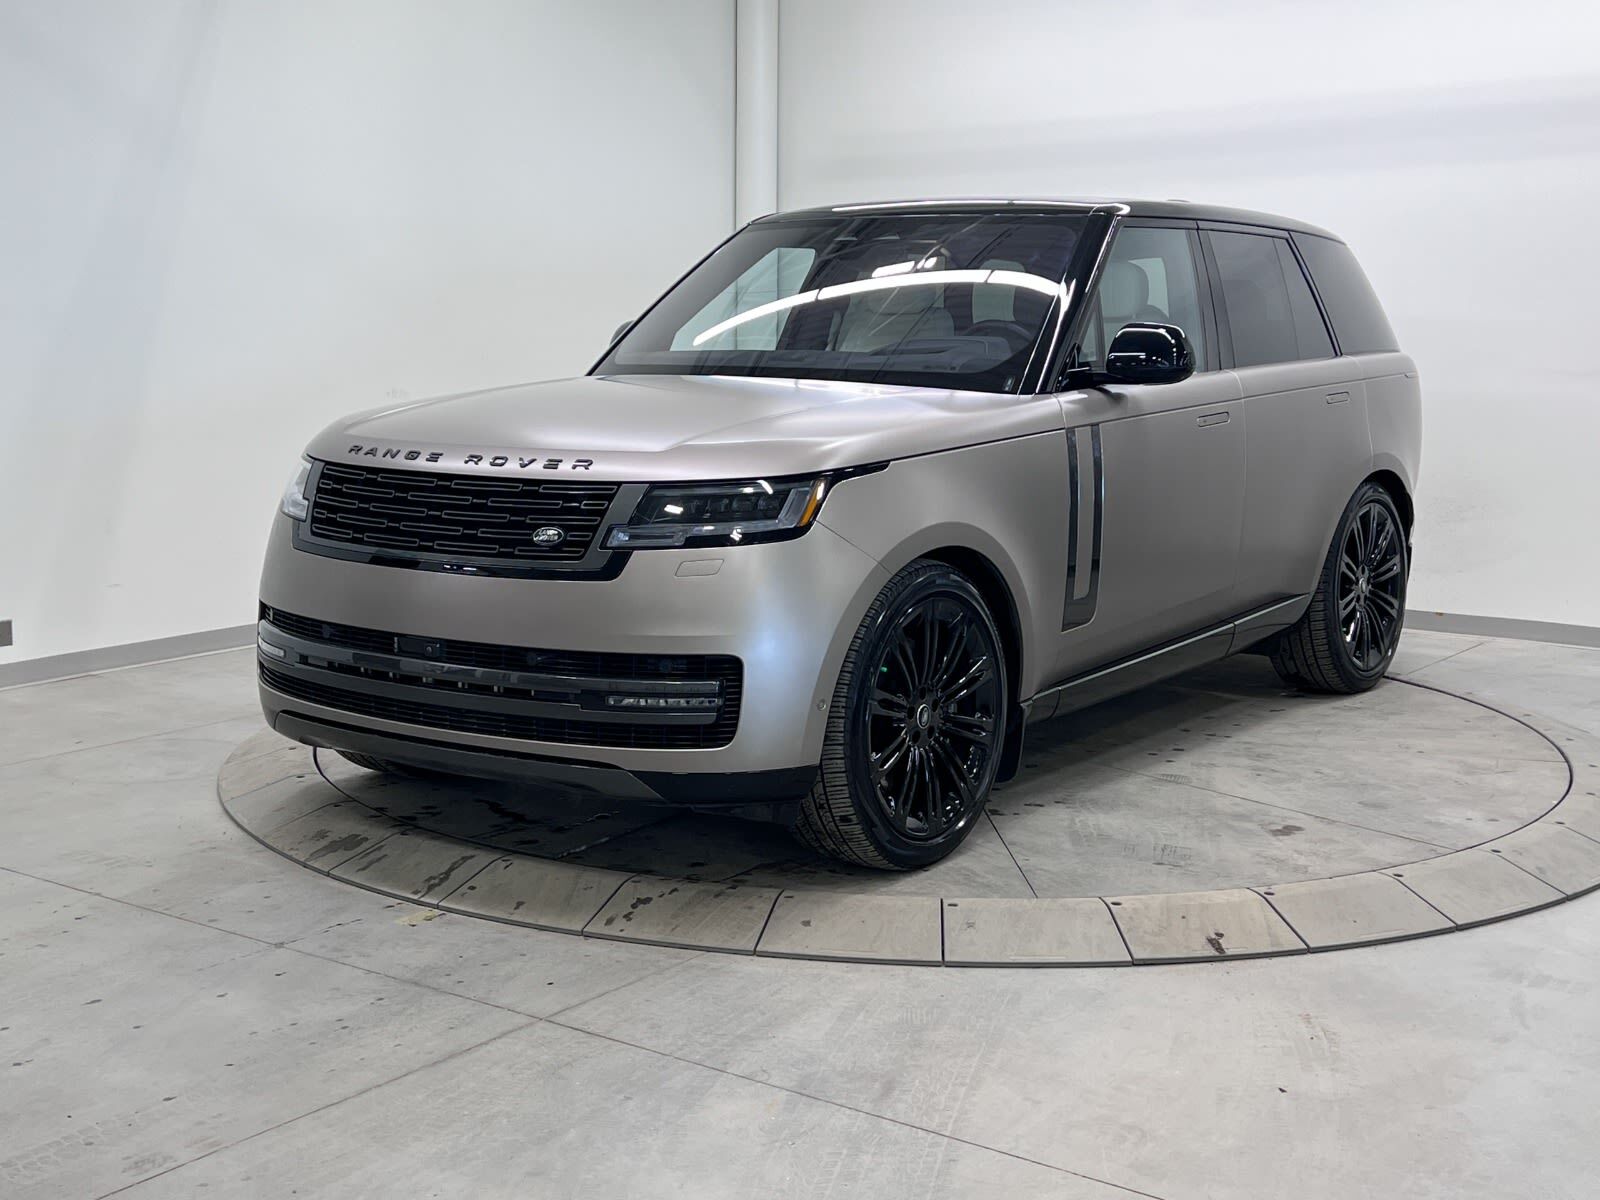 2023 Land Rover Range Rover DEMO SALE EVENT ON NOW!